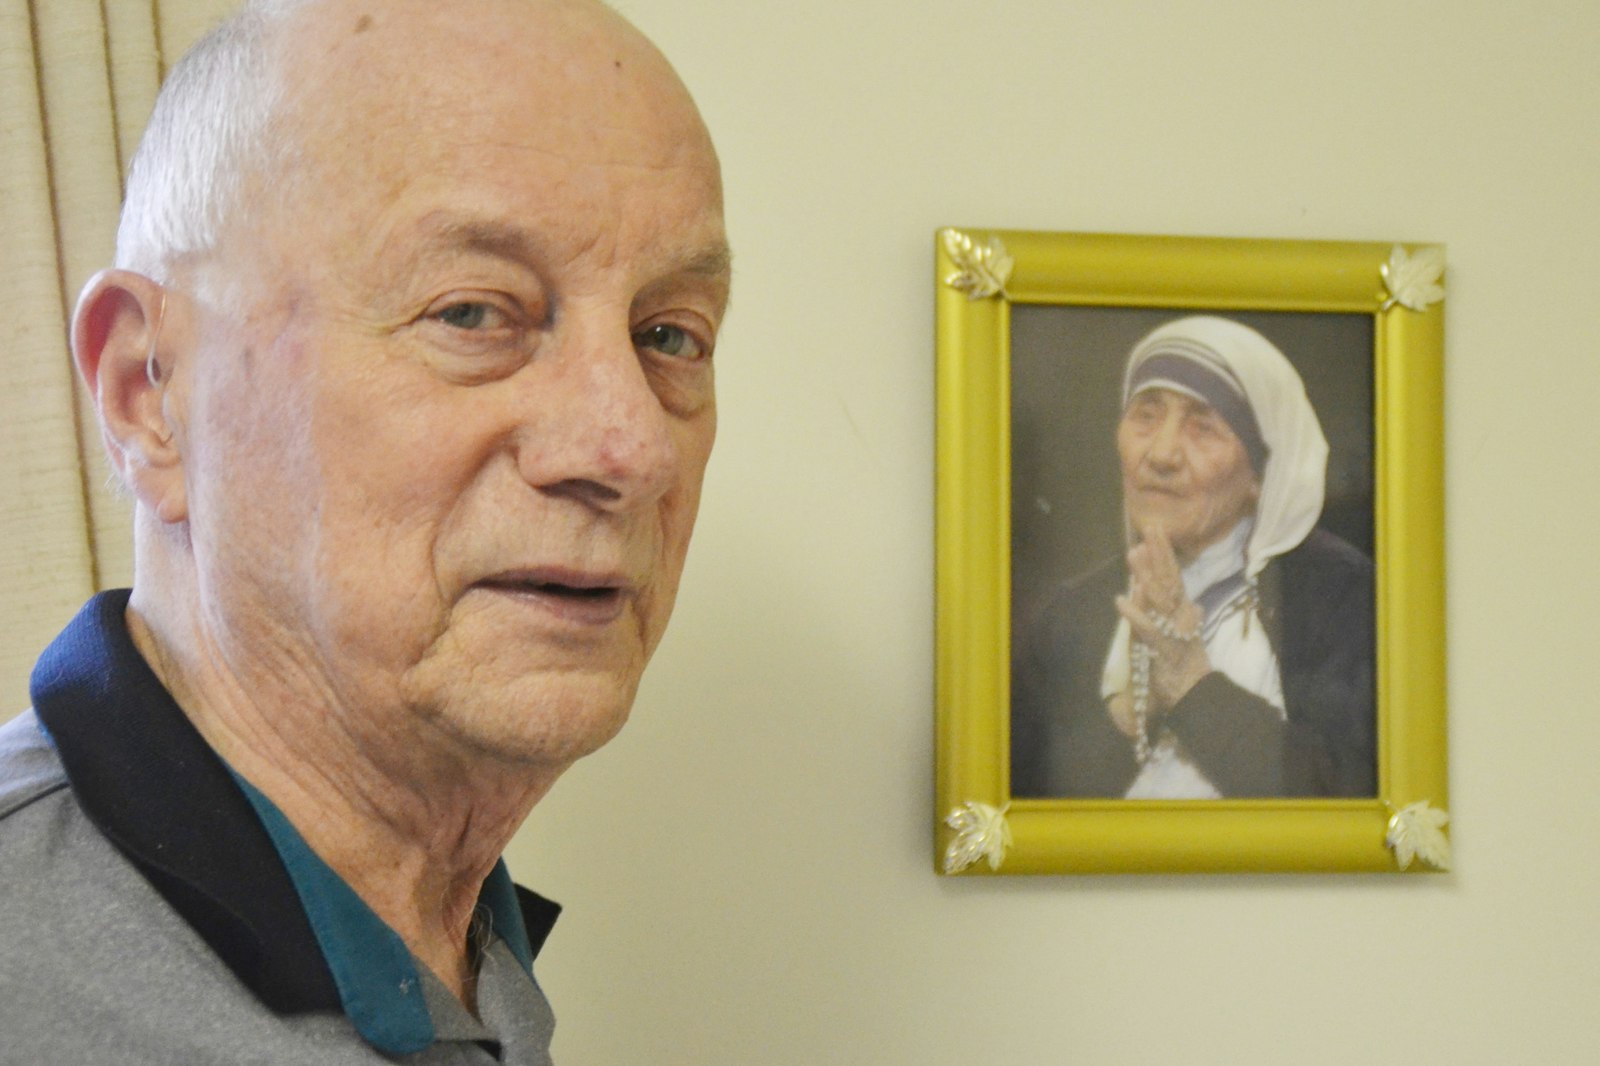 In 1967, Fr. Cachat spent a month serving with St. Teresa of Calcutta's Missions of Charity Brothers. He described the future saint as "very down to earth," constantly reminding the sisters in her charge that their work with the poor was first and foremost "for Jesus." (Jim Dudley | Special to Detroit Catholic)